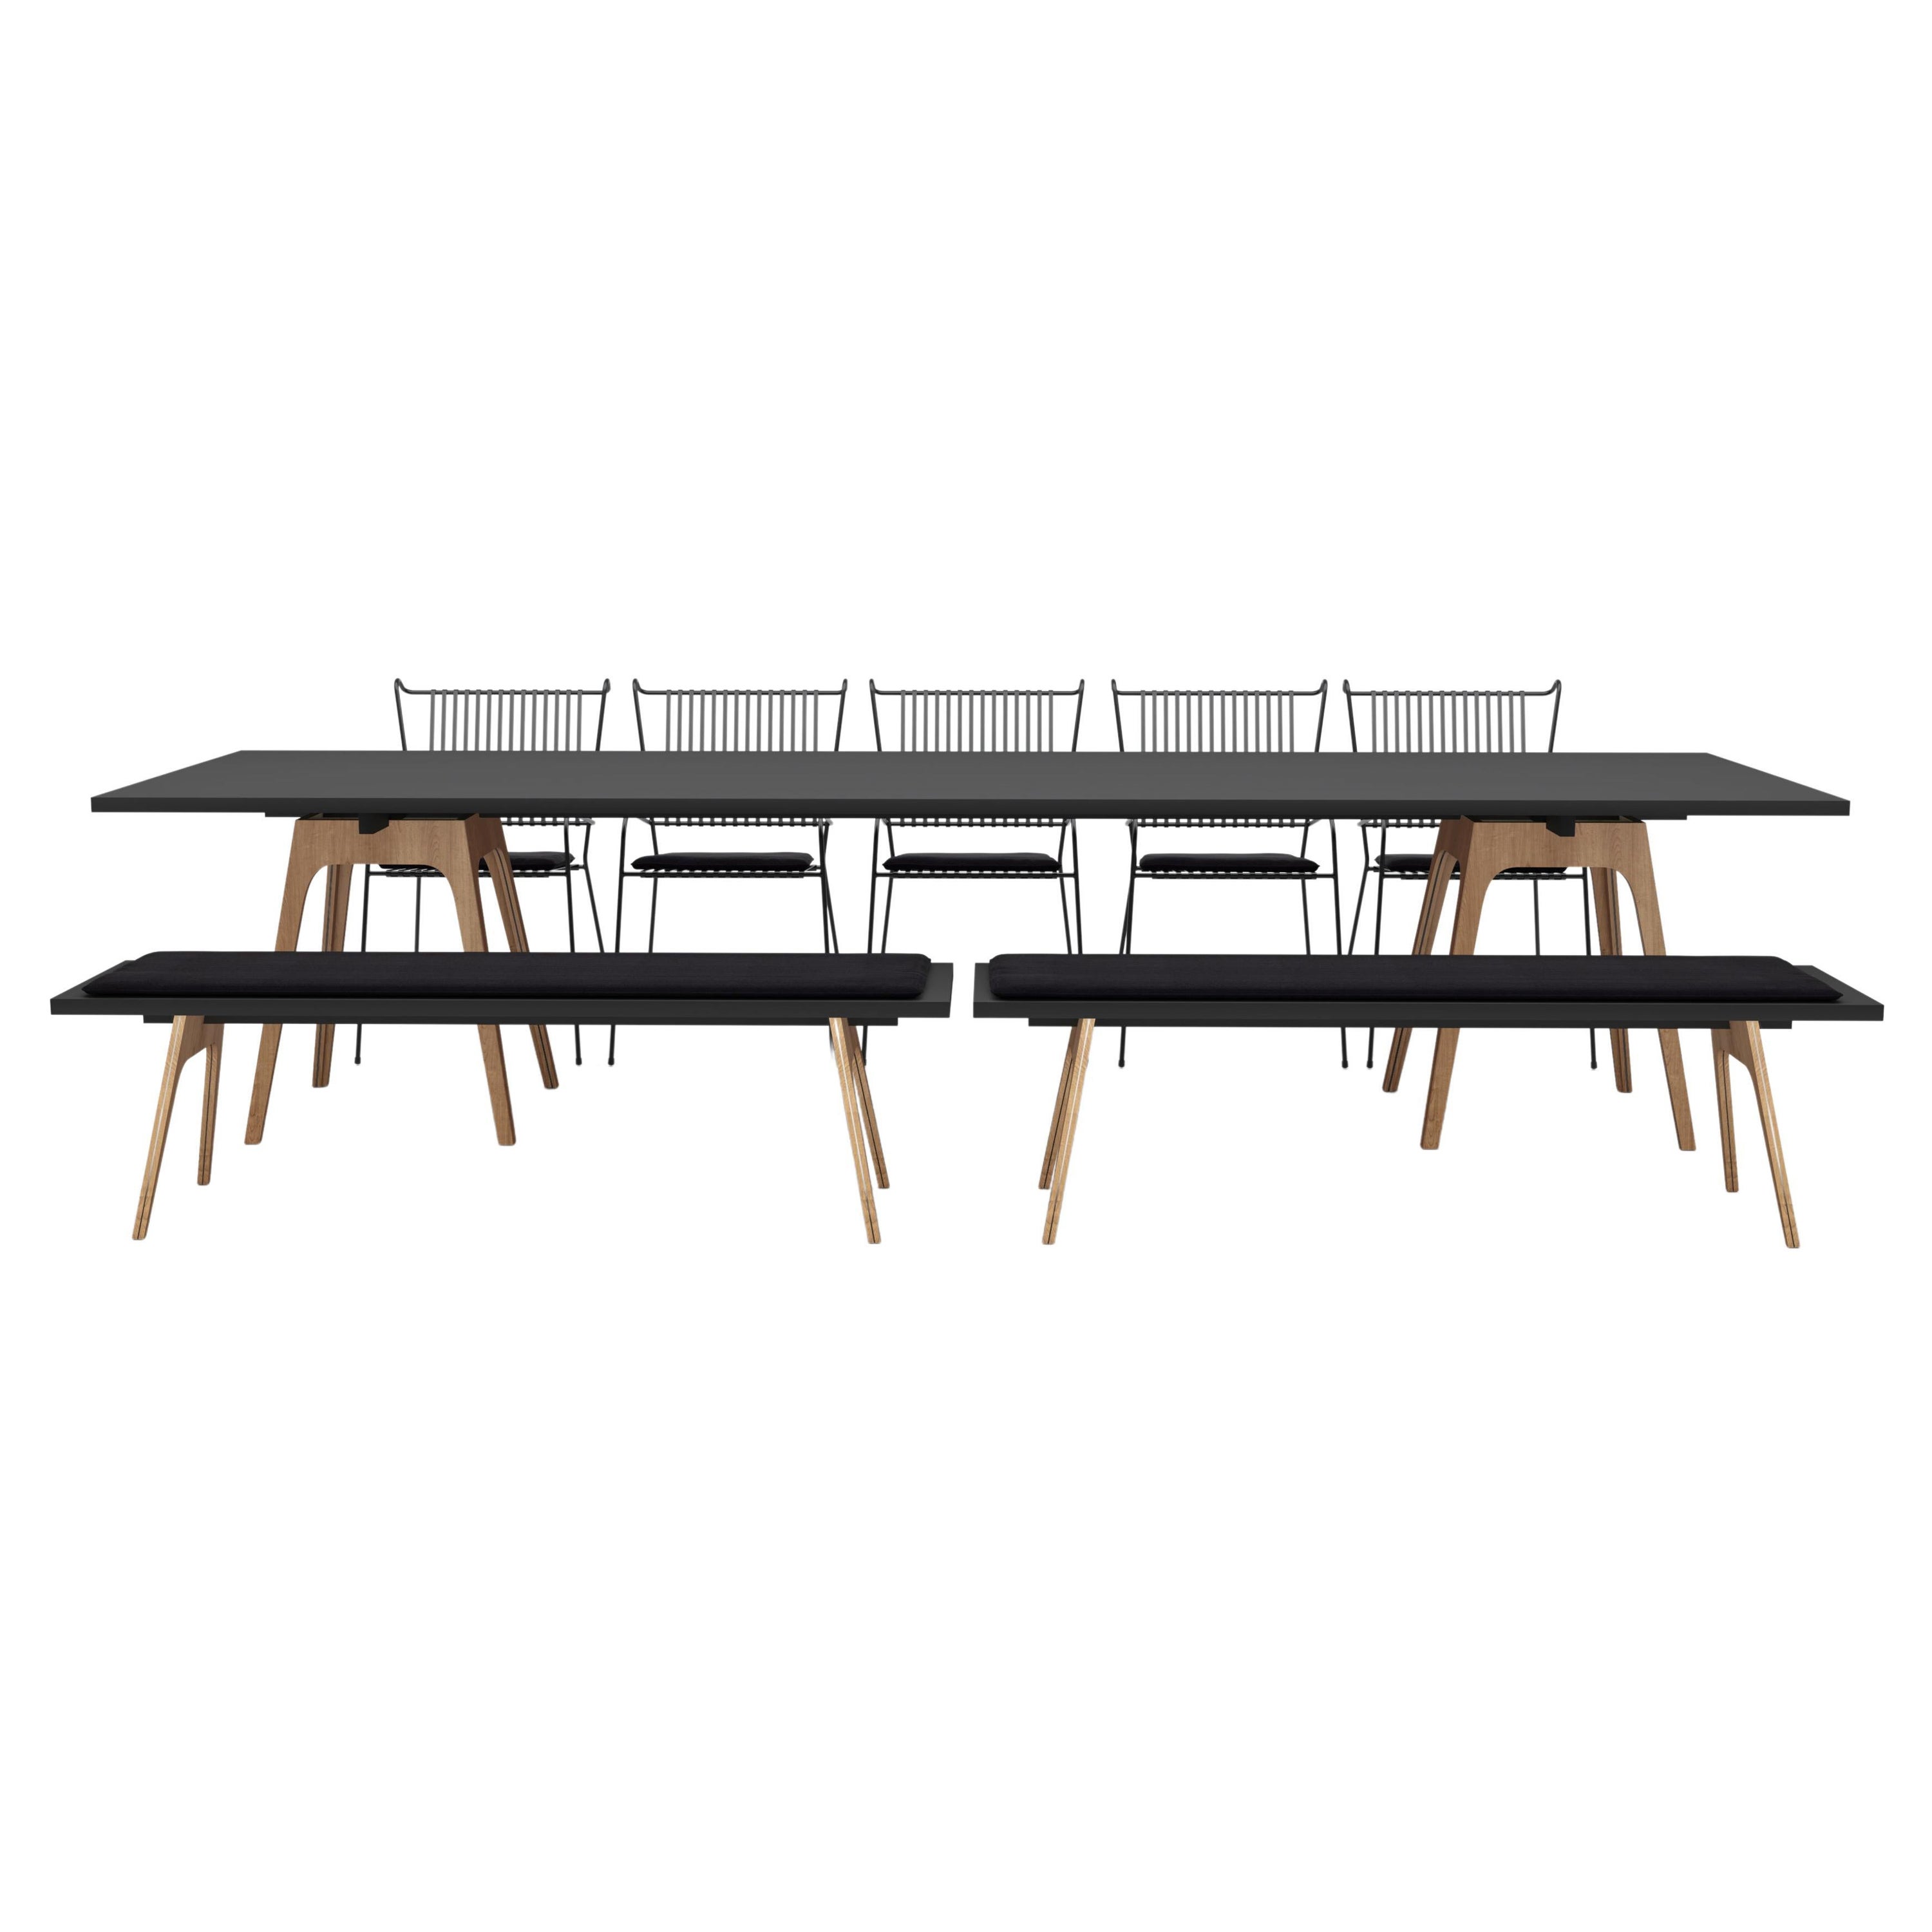 Set of 8 Marina Black Dining Table, Benches and Capri Chairs by Cools Collection For Sale